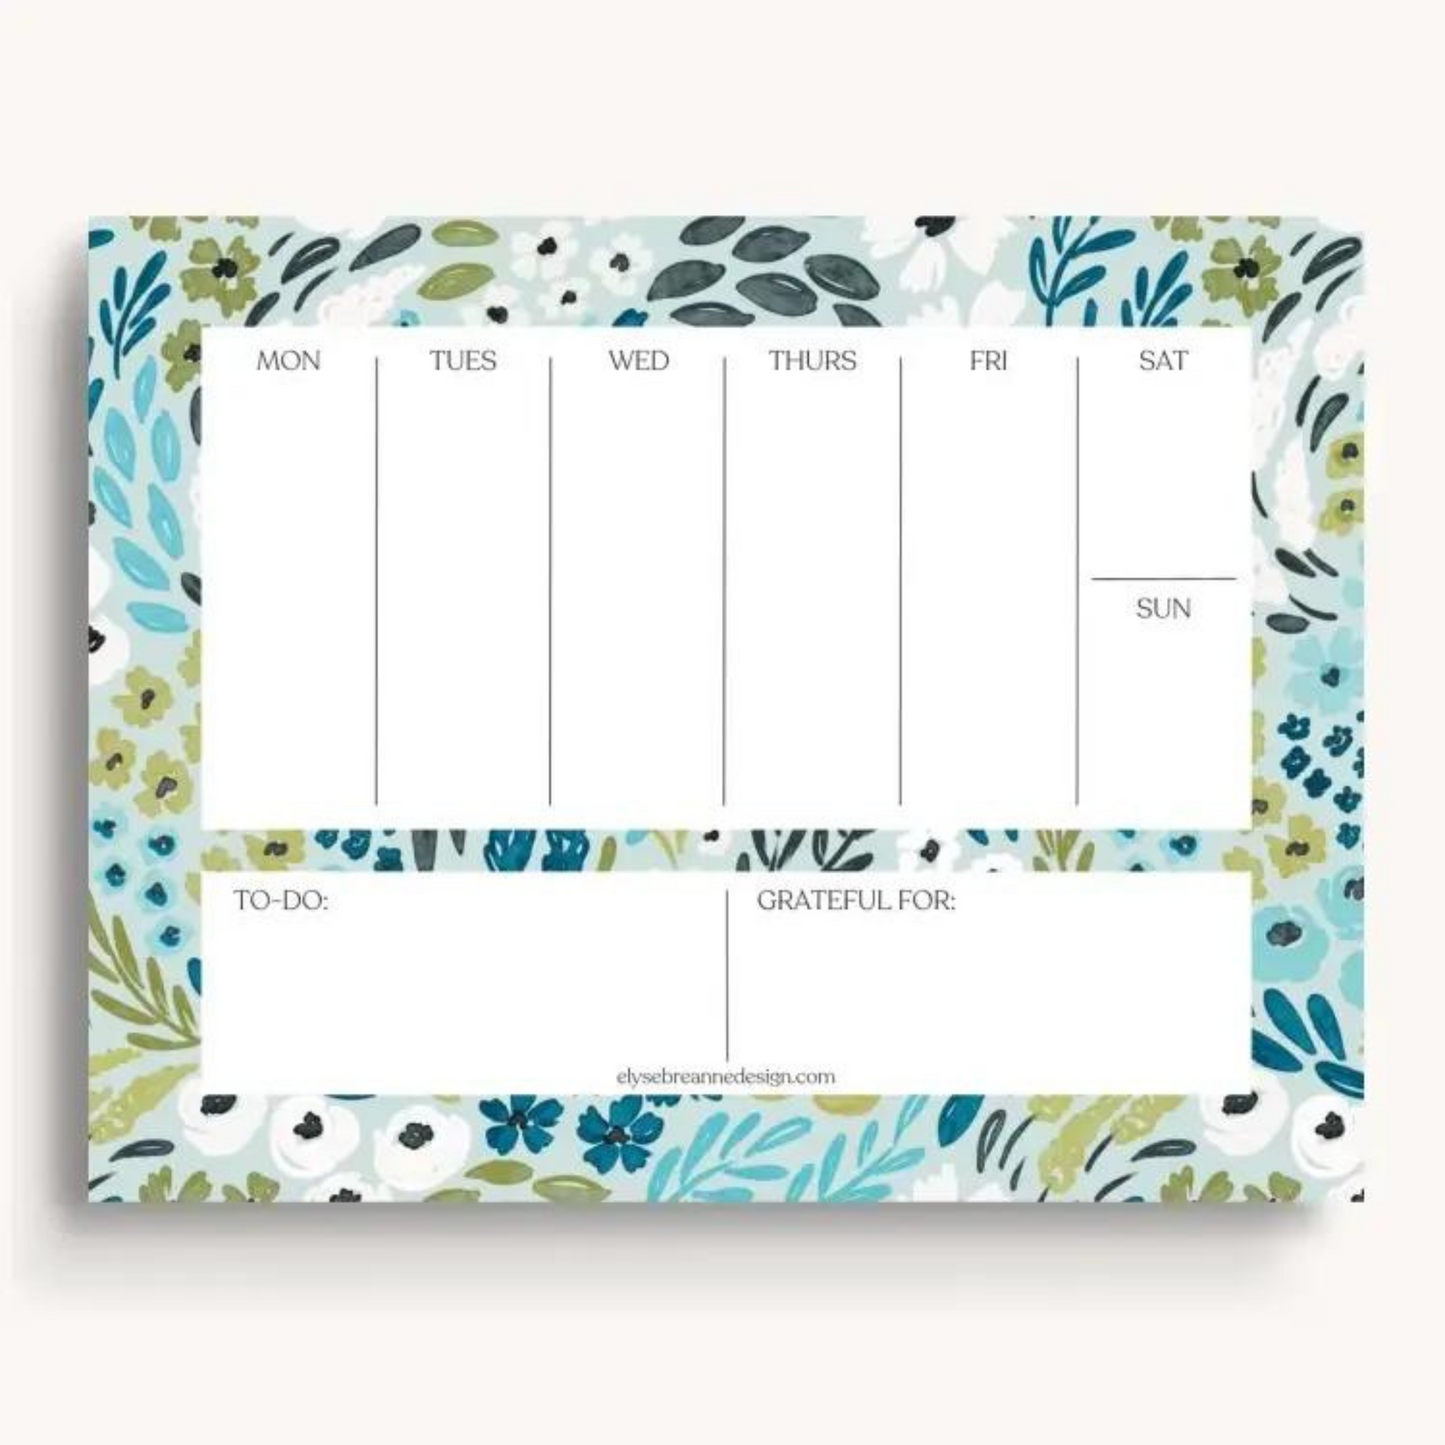 Plan your week like a pro with this delightful and practical weekly planner note pad.